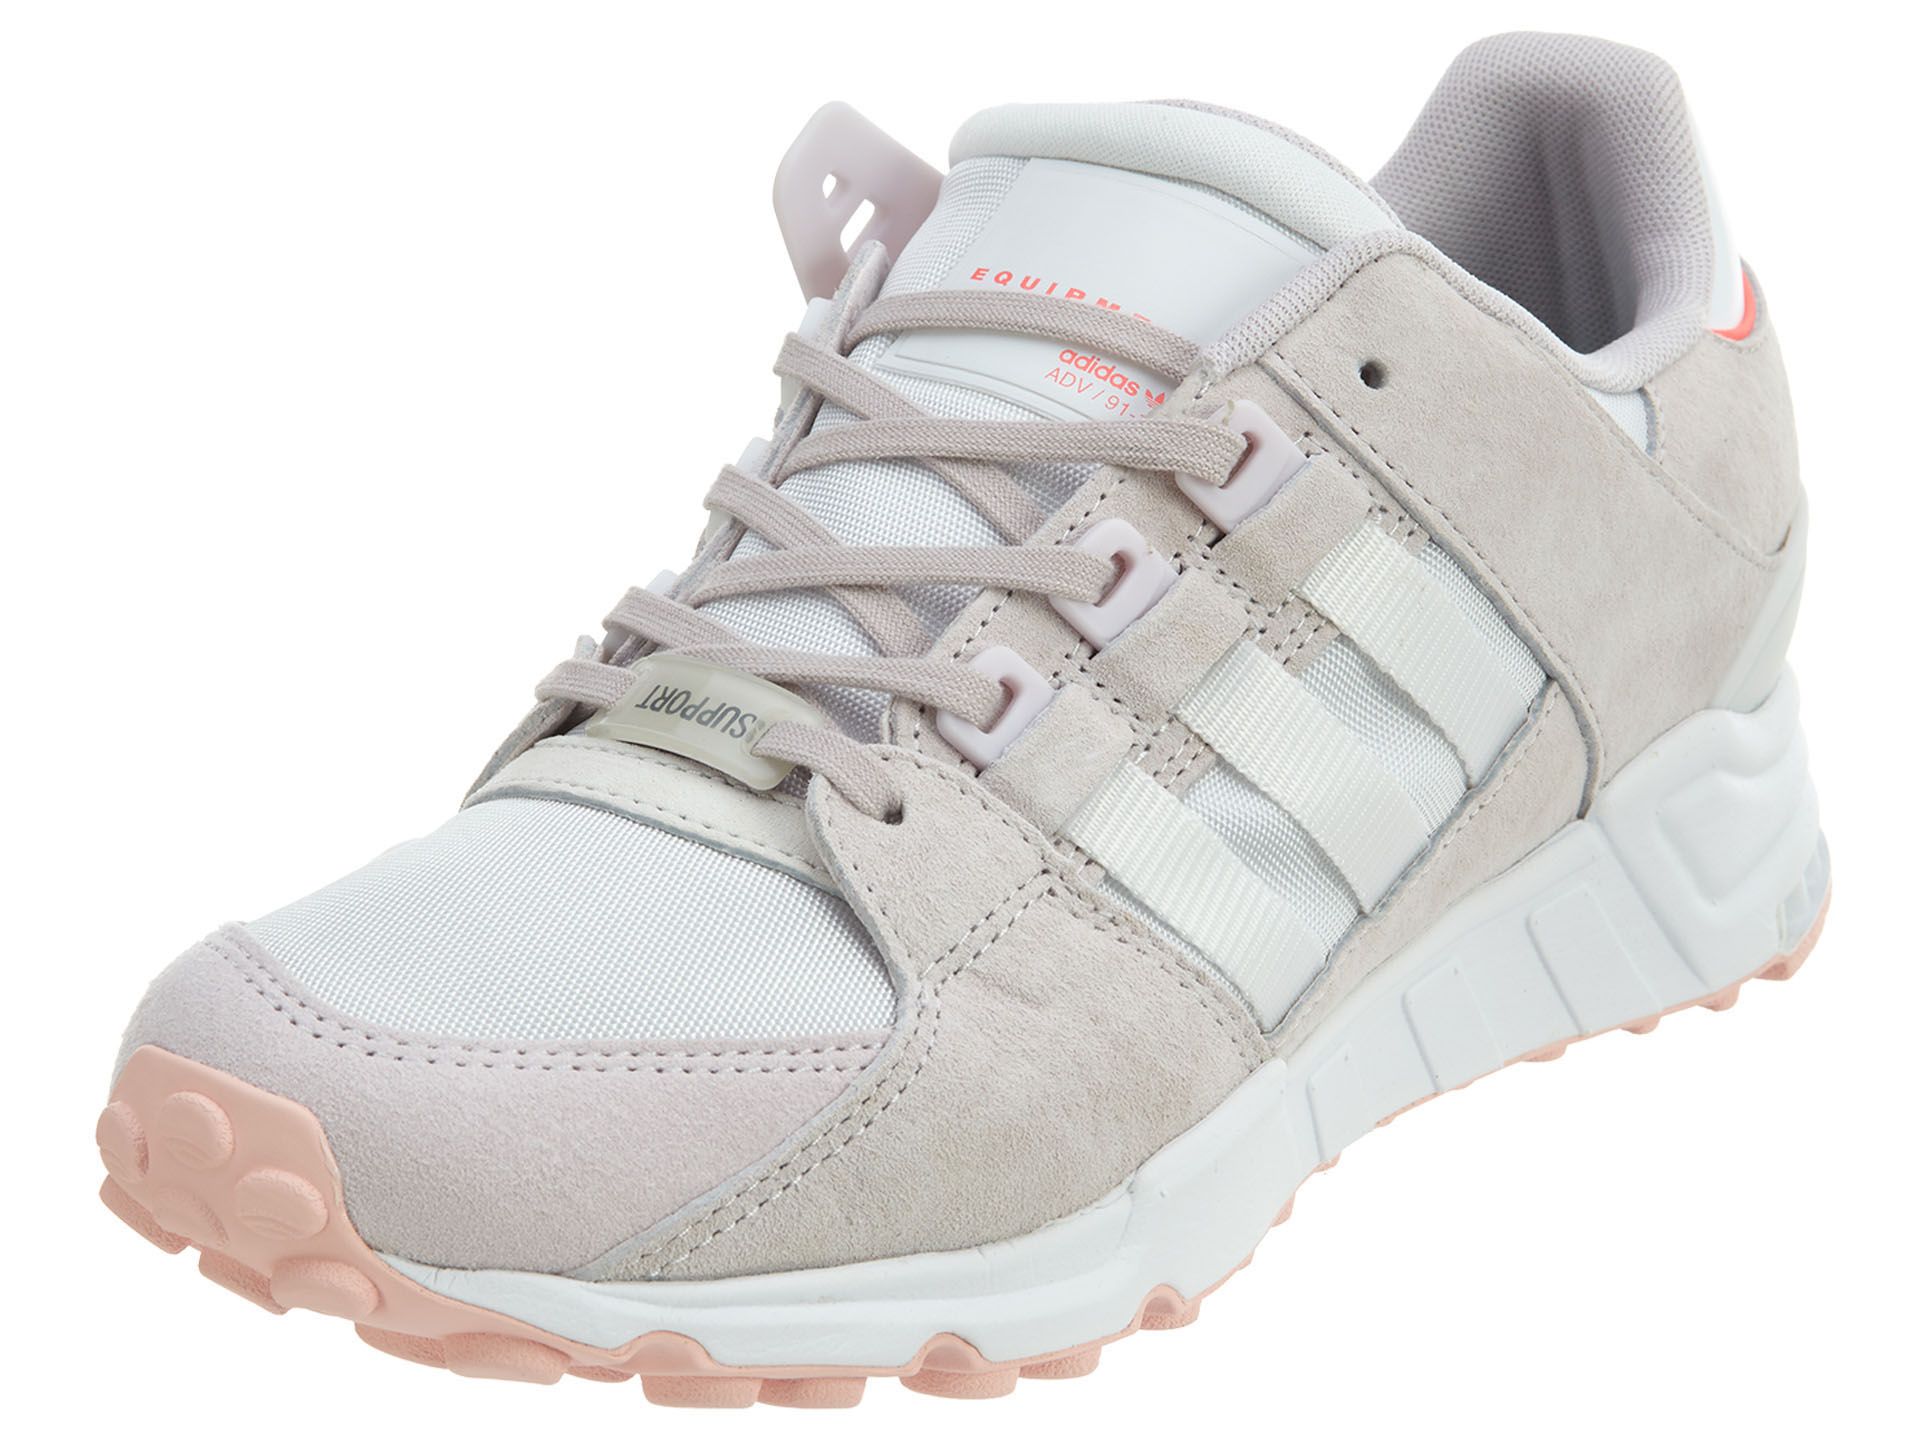 Adidas Eqt Support Rf Womens Style 